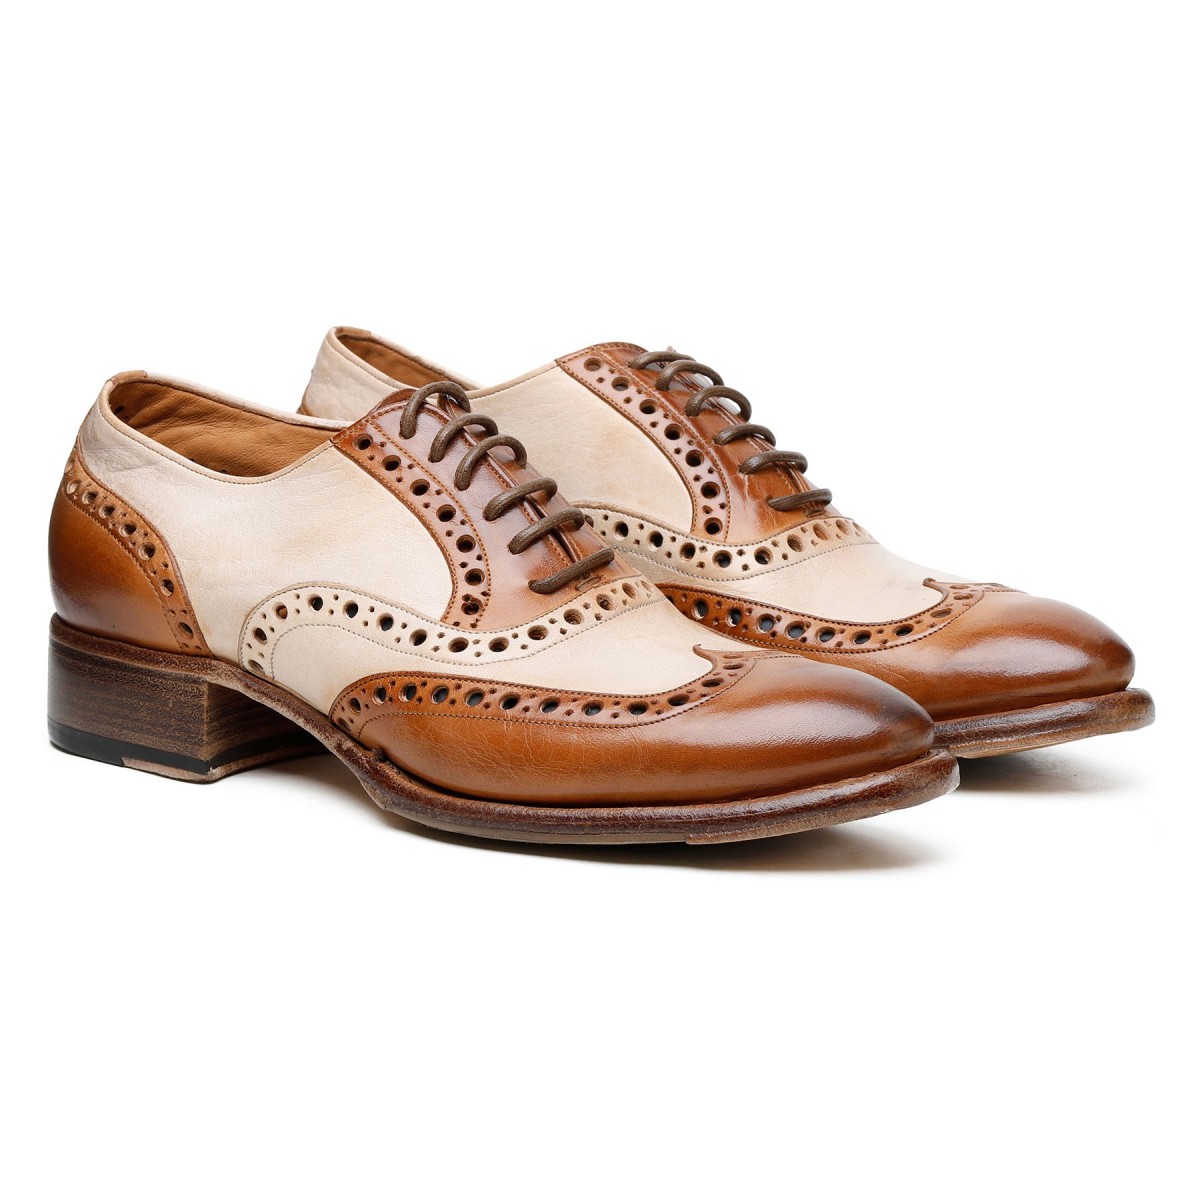 Two-tone leather Oxford shoes